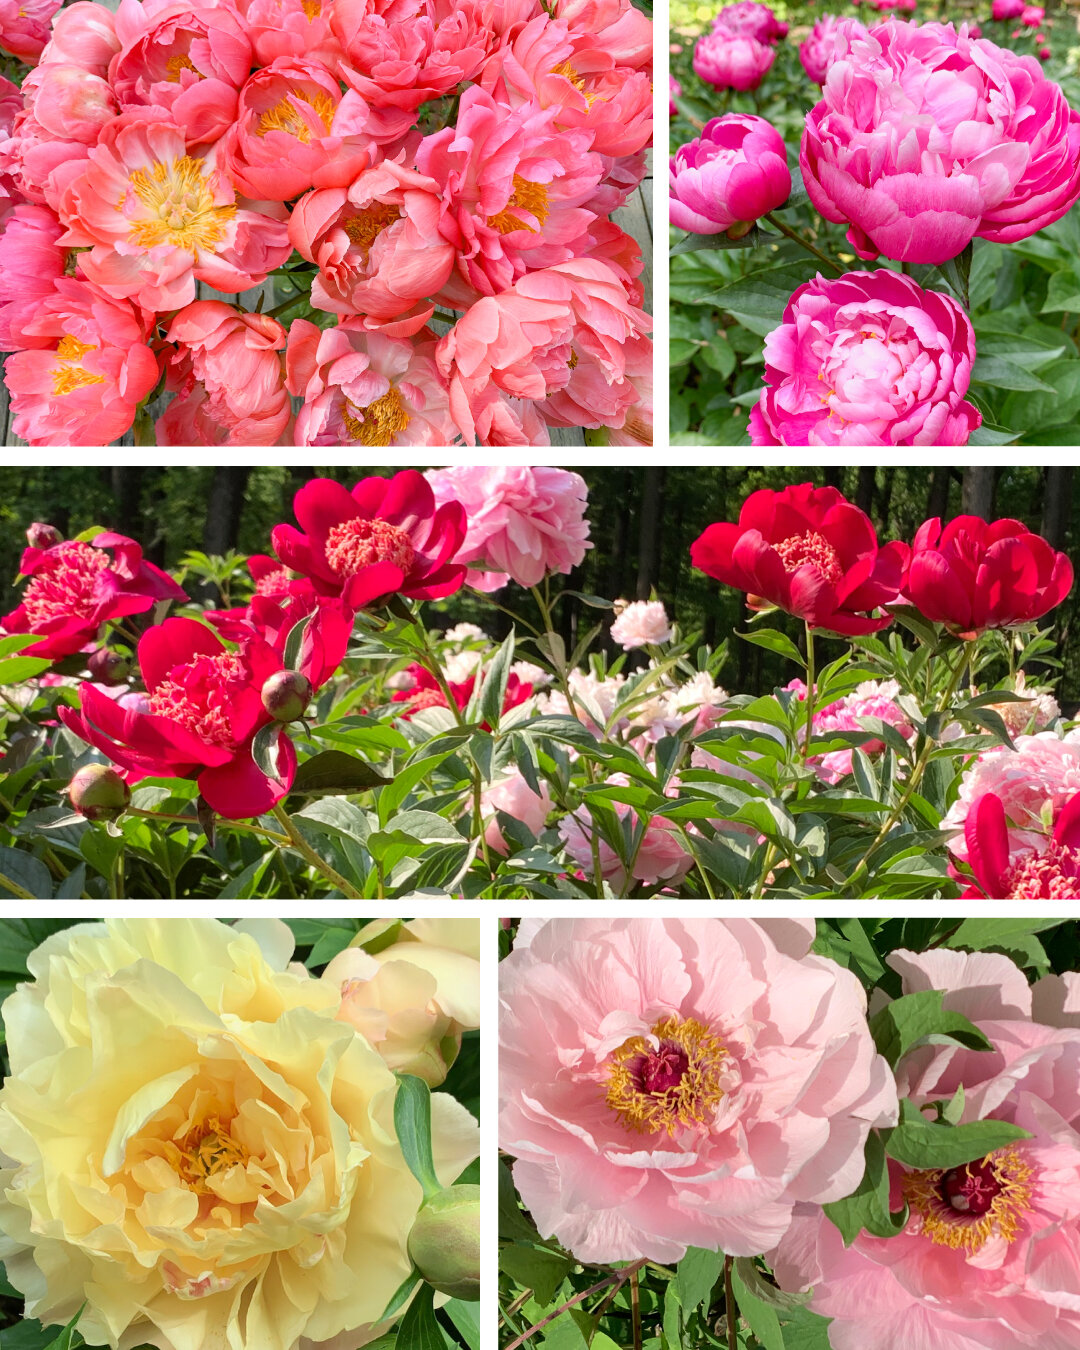 As we look back at 2023, we wanted to send a heartfelt thank you for your support this past year. We couldn't have made it without you. Your enthusiasm for peonies warms our hearts. It was great to see so many of your faces again at our Display Garde